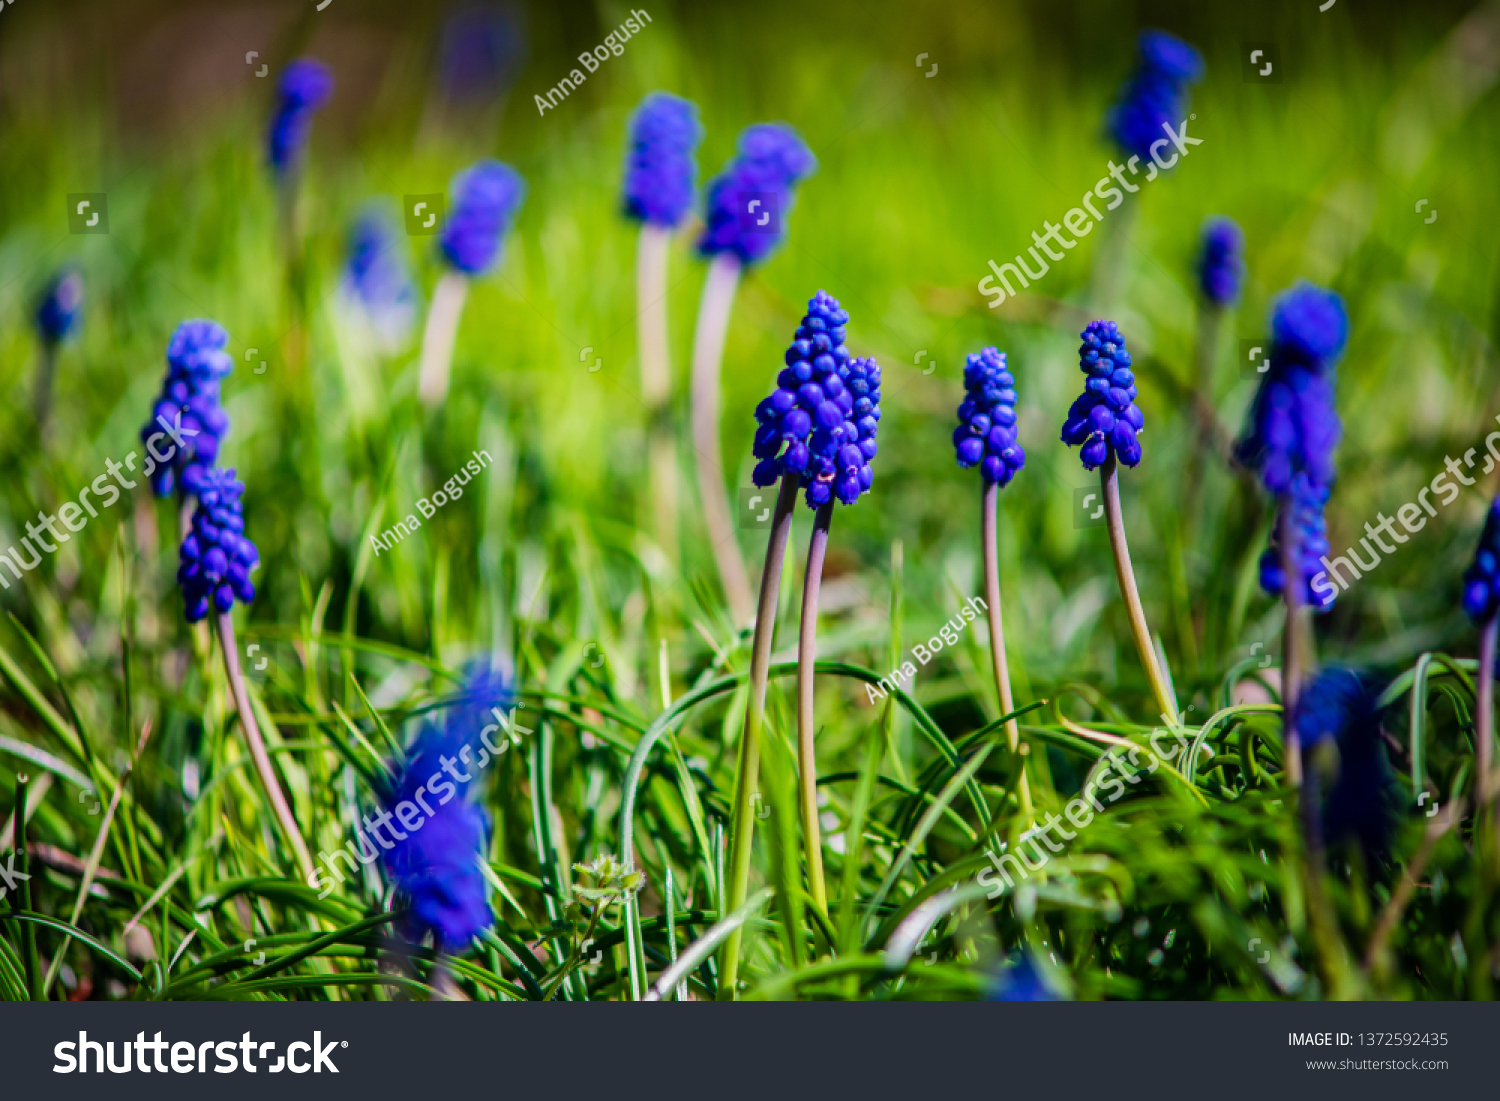 Wild hyacinth flowers in a field in spring time forest #1372592435